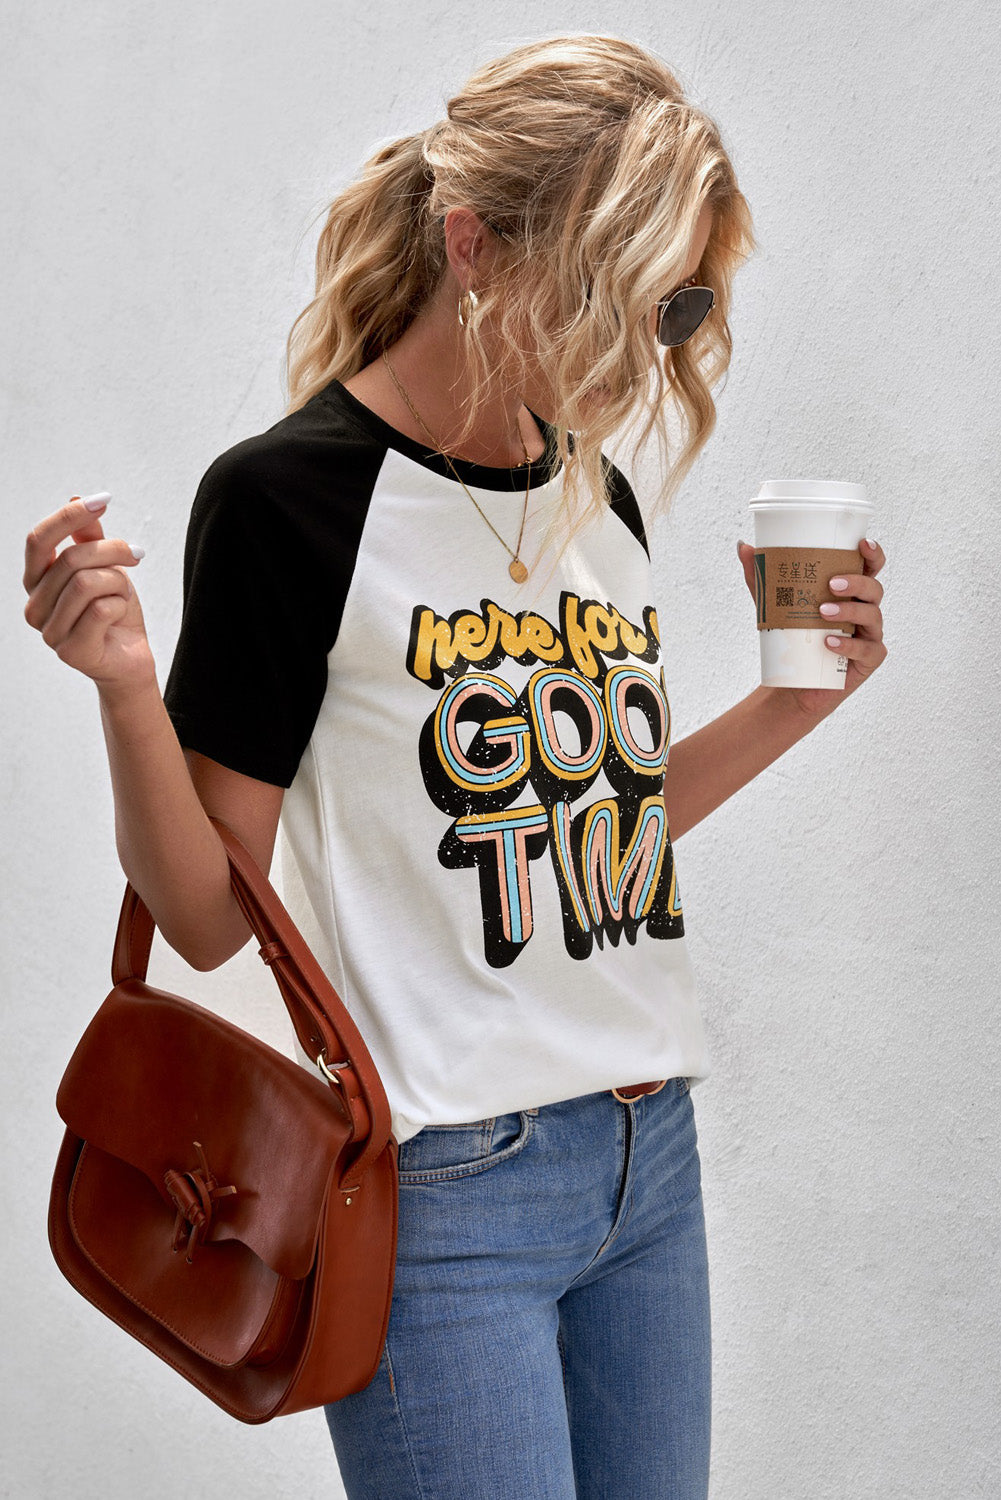 HERE FOR A GOOD TIME Tee Shirt  Krazy Heart Designs Boutique   